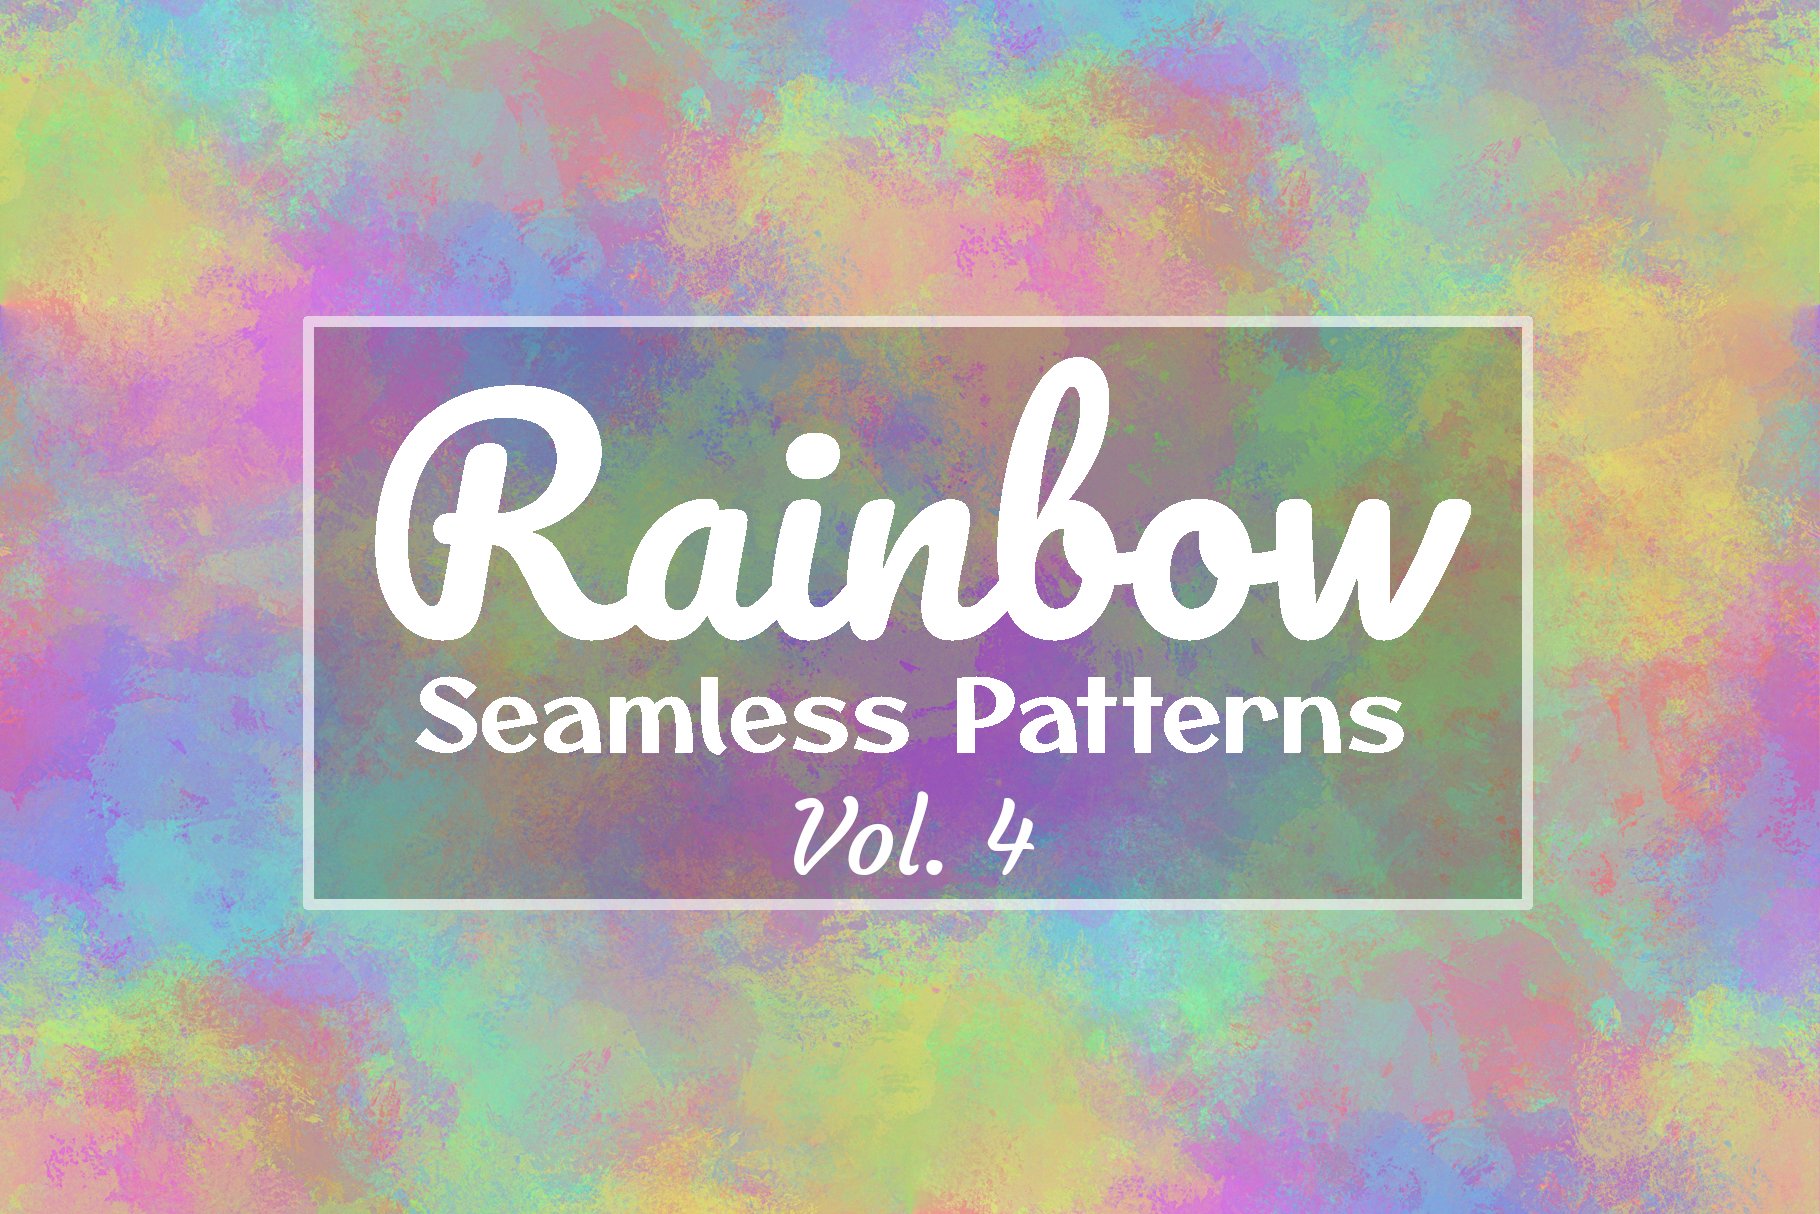 Rainbow Seamless Watercolor Vol. 4 cover image.